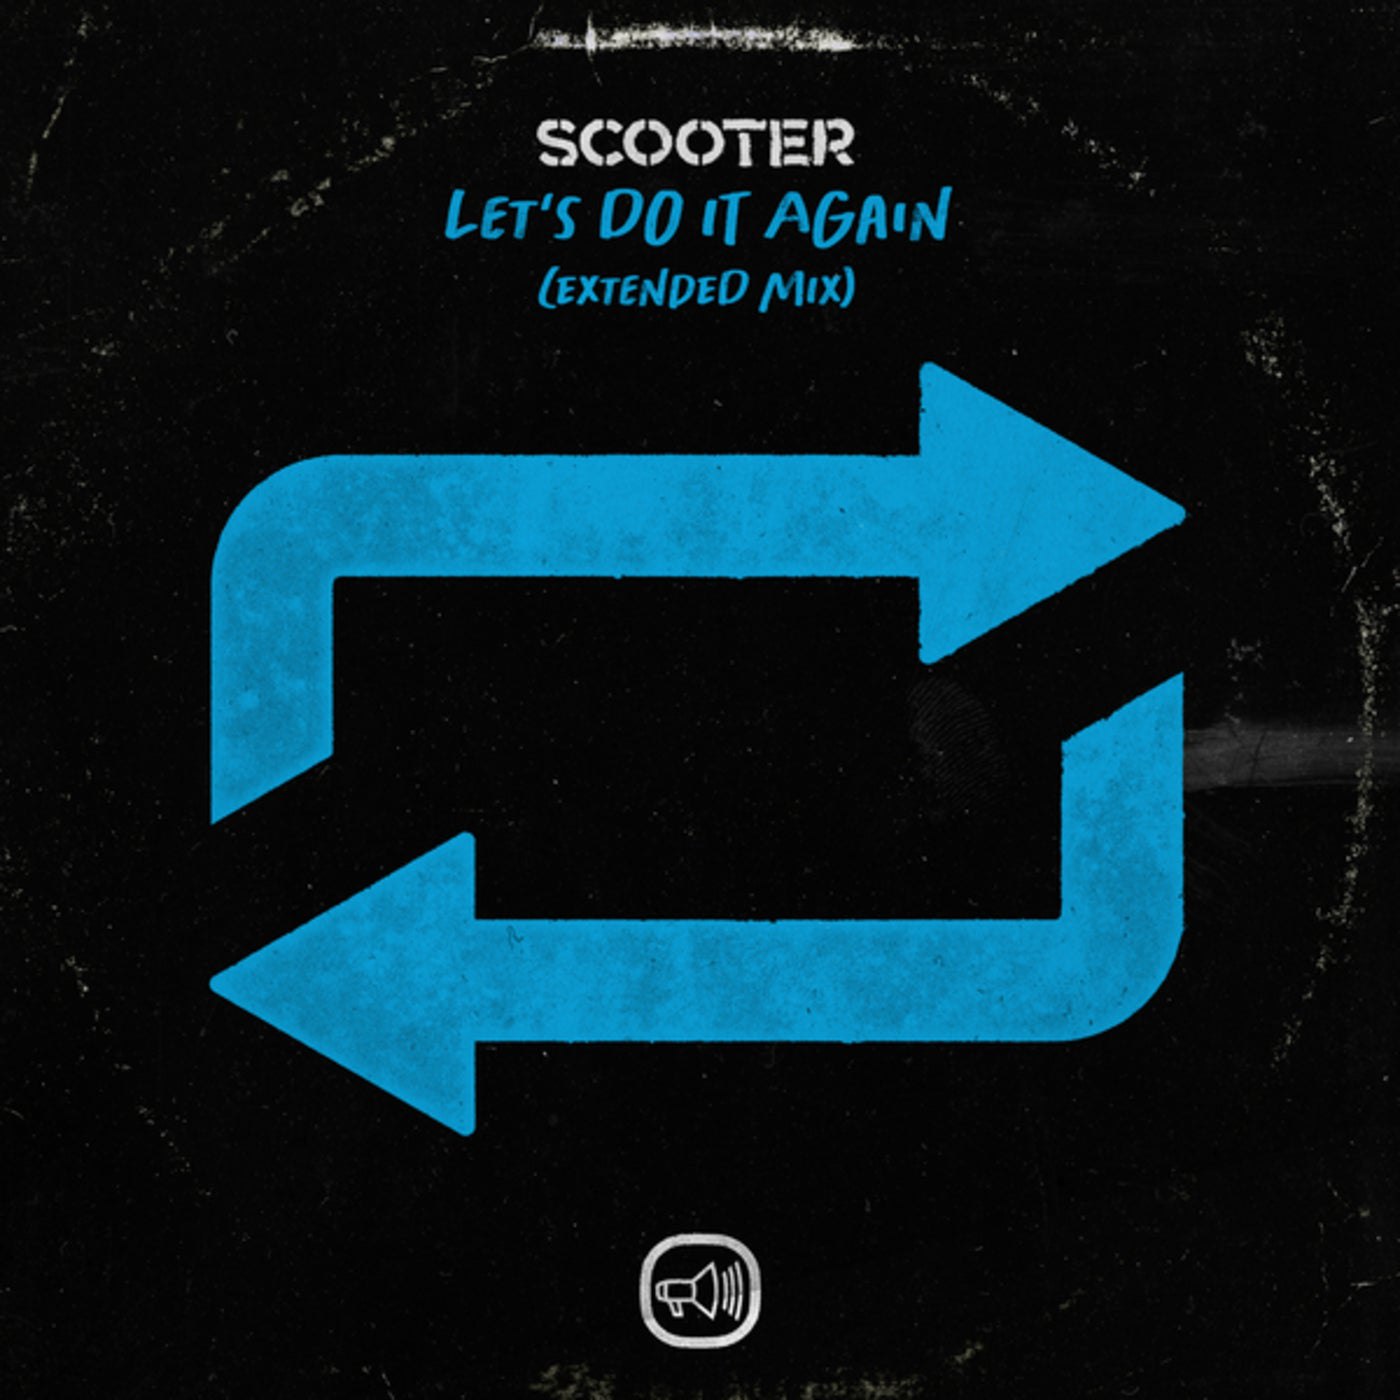 Scooter - Let's Do It Again (Extended Mix)